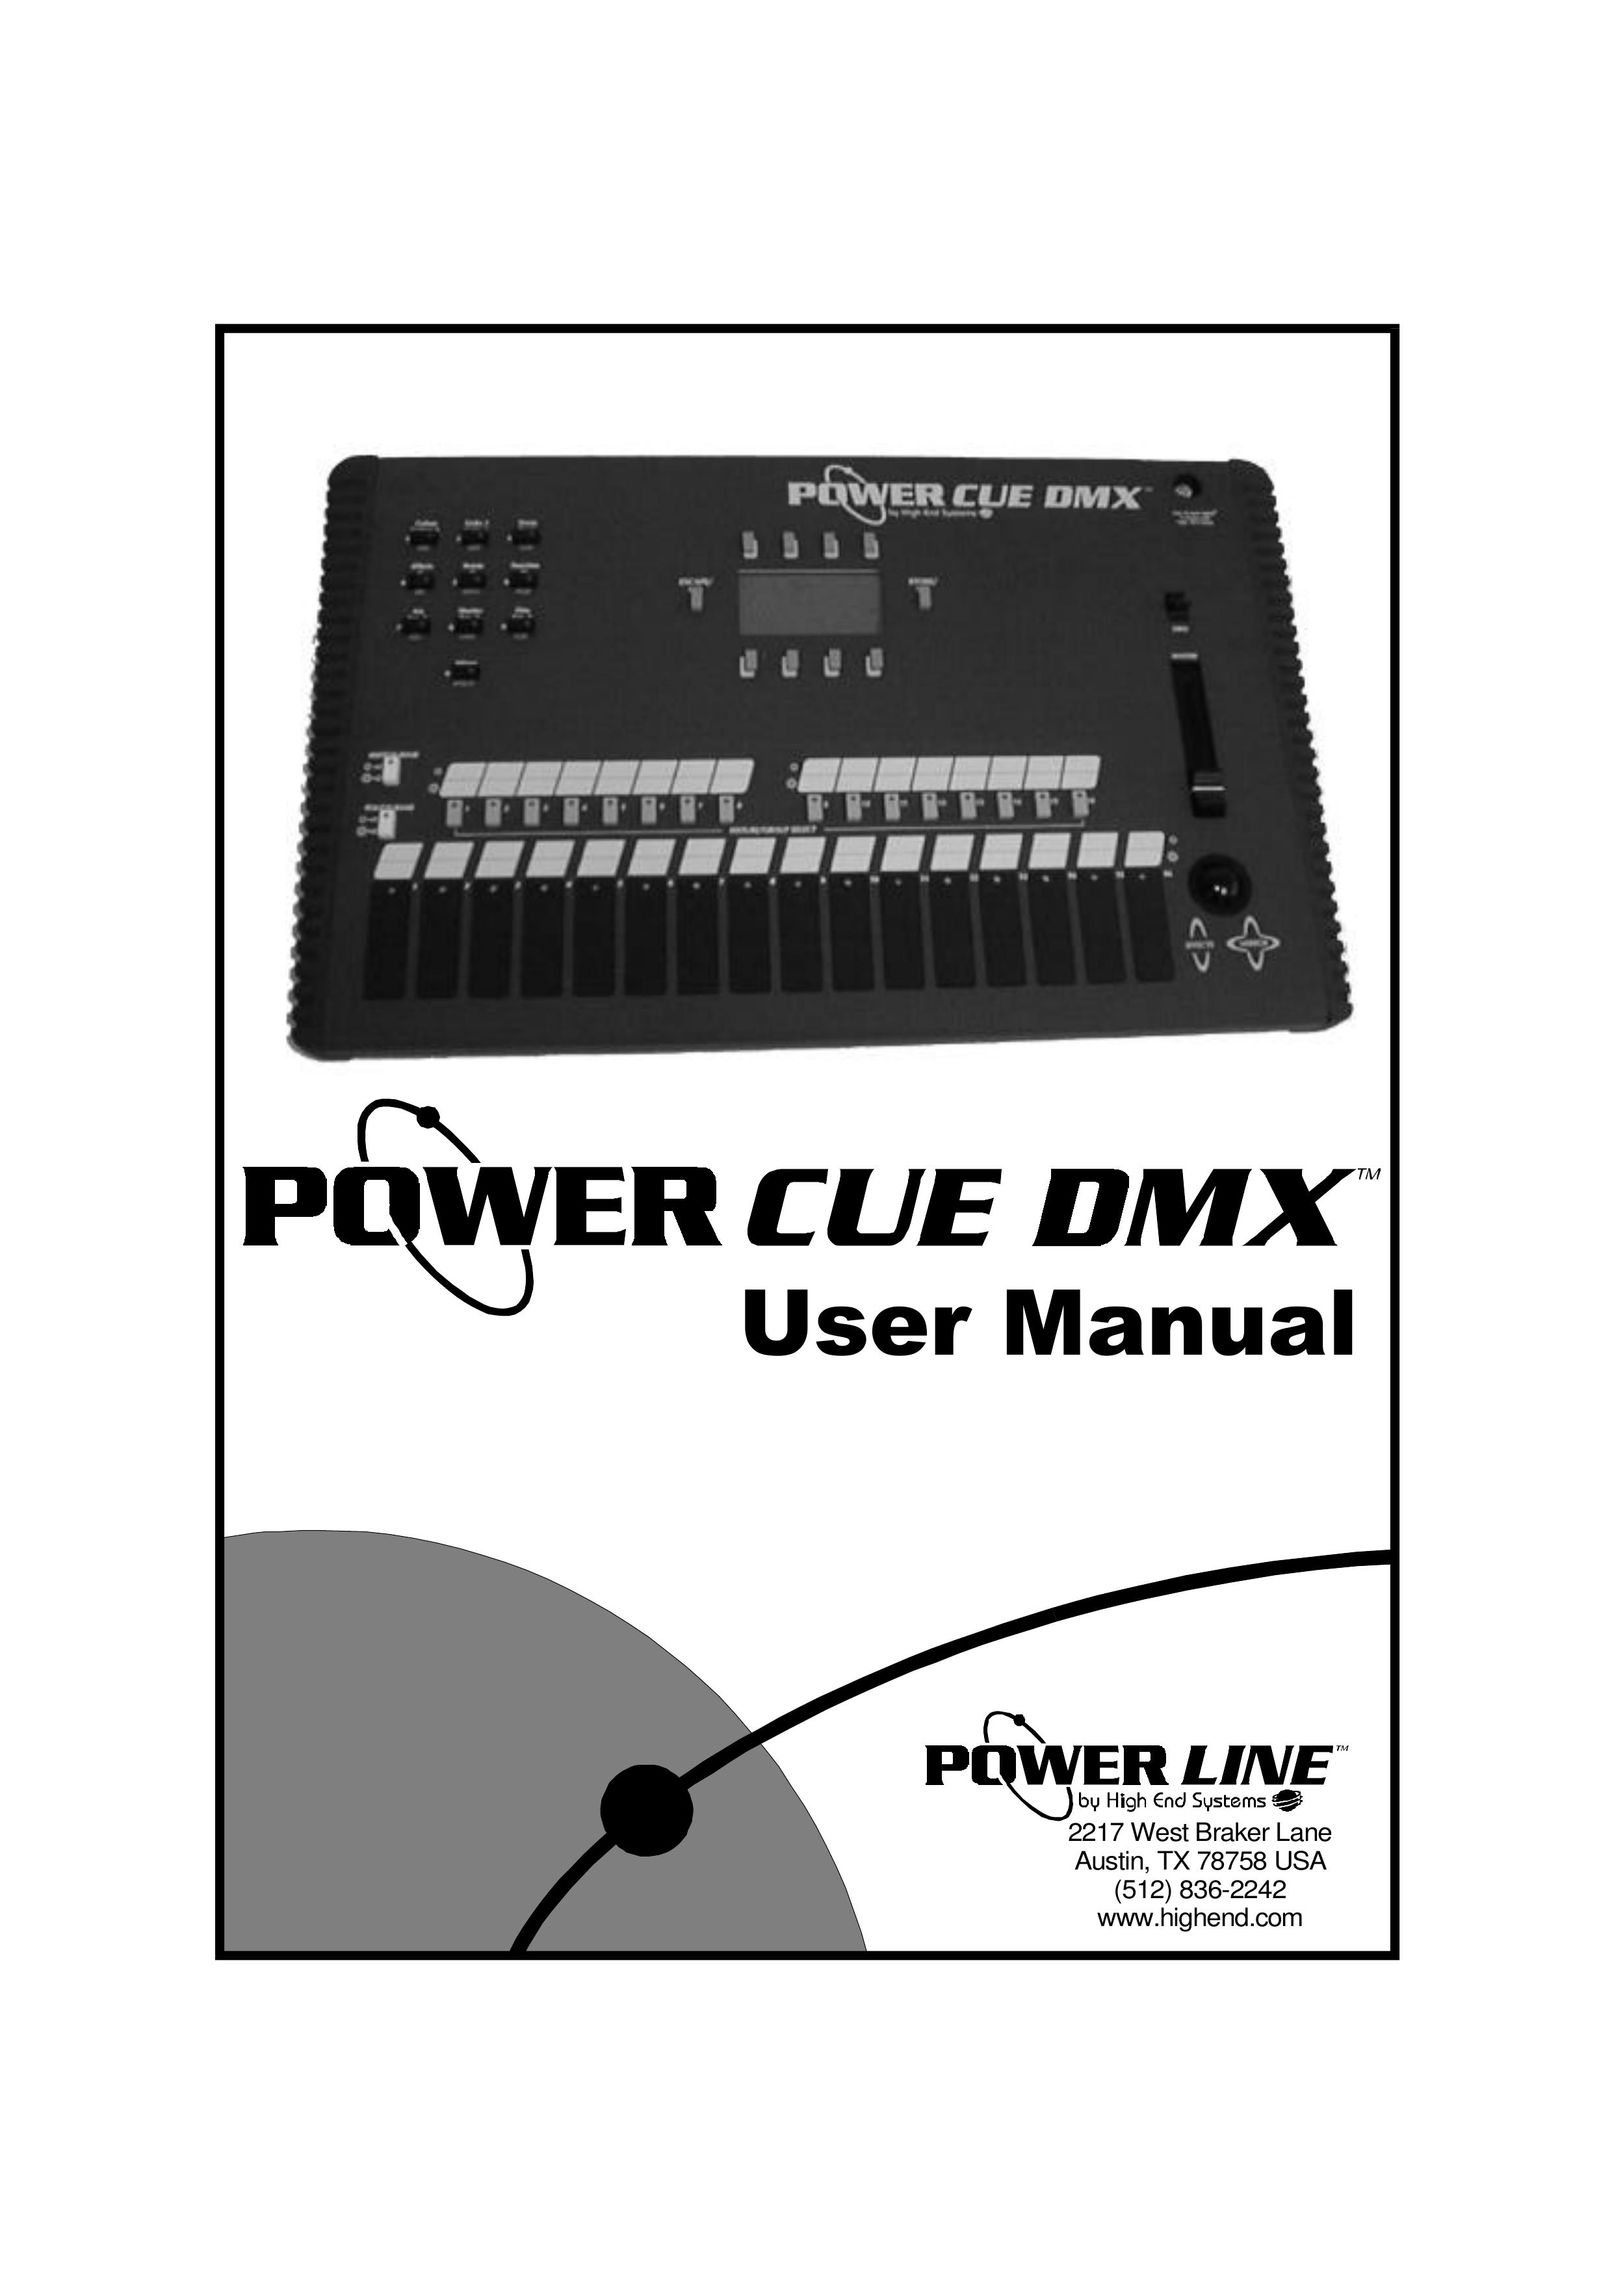 High End Systems Power Cue DMX Power Supply User Manual